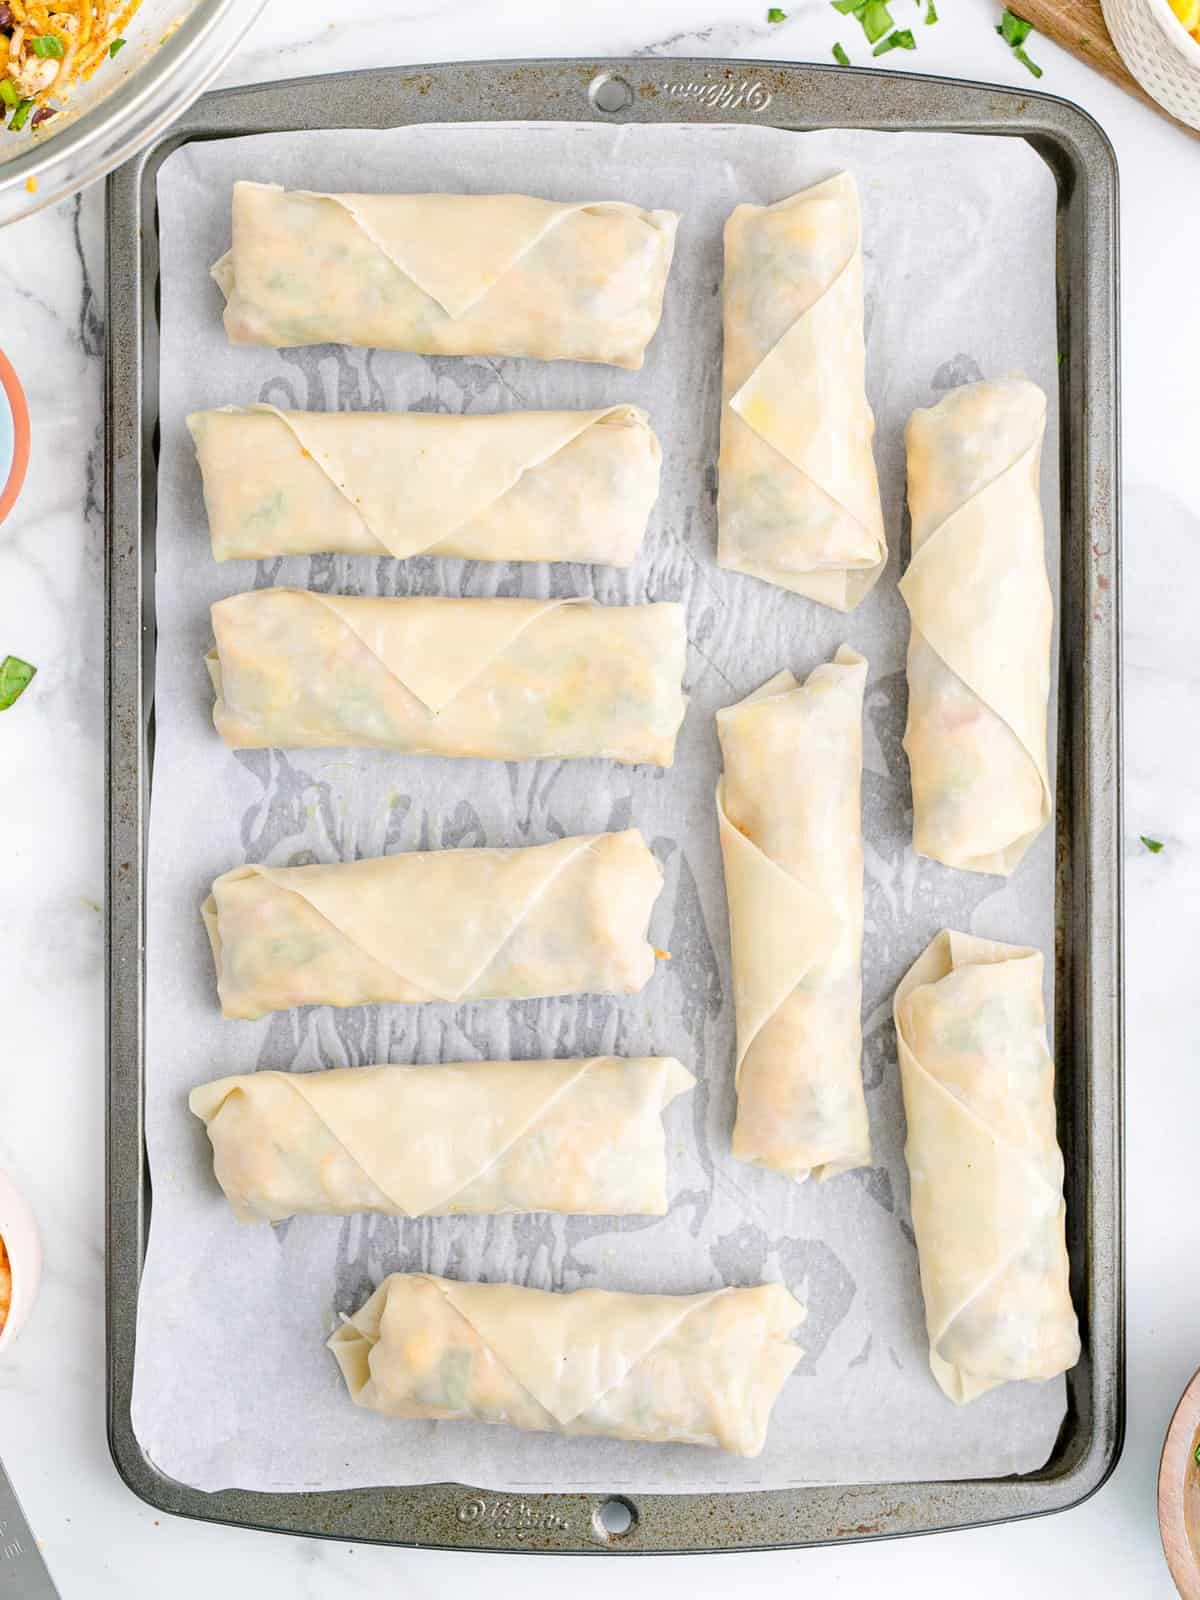 Multiple egg rolls on a parchment lined baking tray.